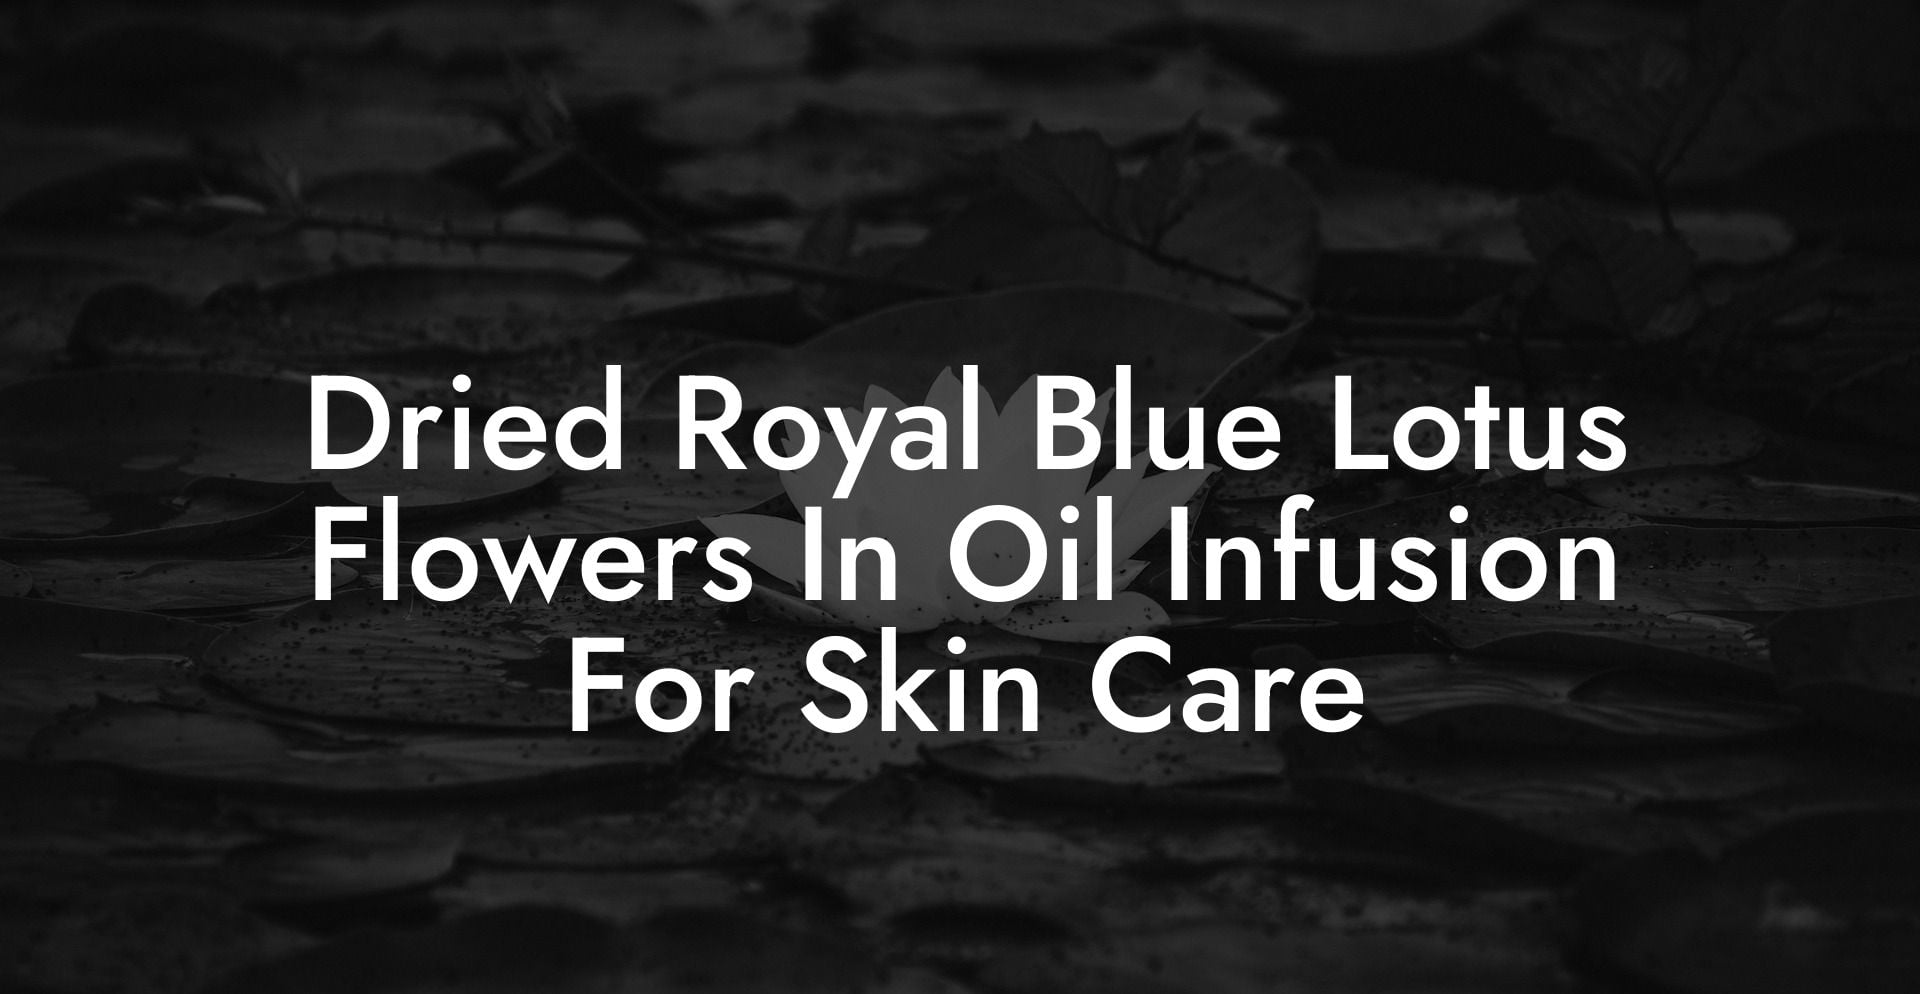 Dried Royal "Blue Lotus" Flowers In Oil Infusion For Skin Care